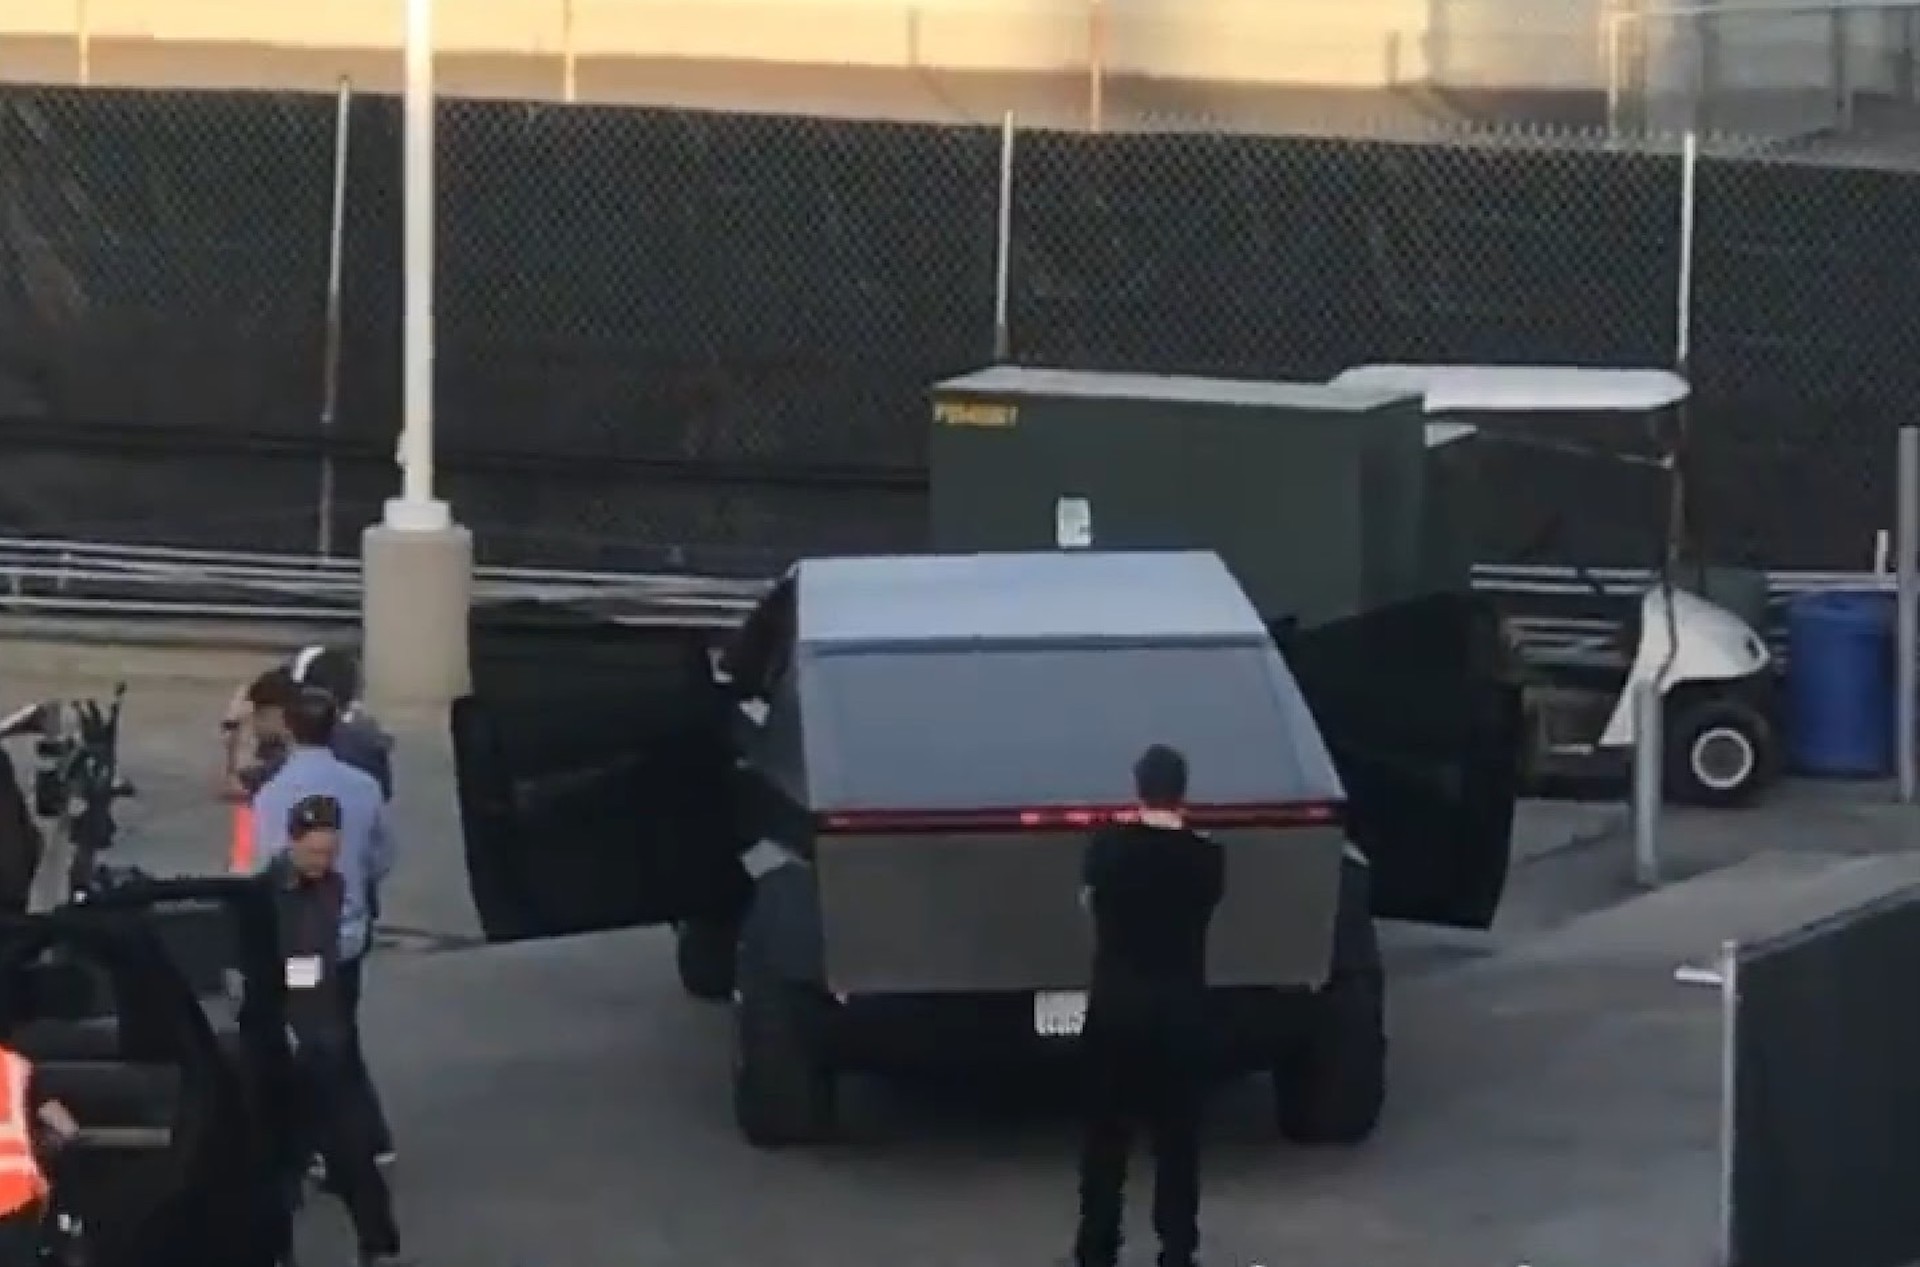 Elon Musk inspecting Tesla Cybertruck prior to filming segment for Jay Leno’s Garage behind SpaceX HQ in Hawthorne, CA